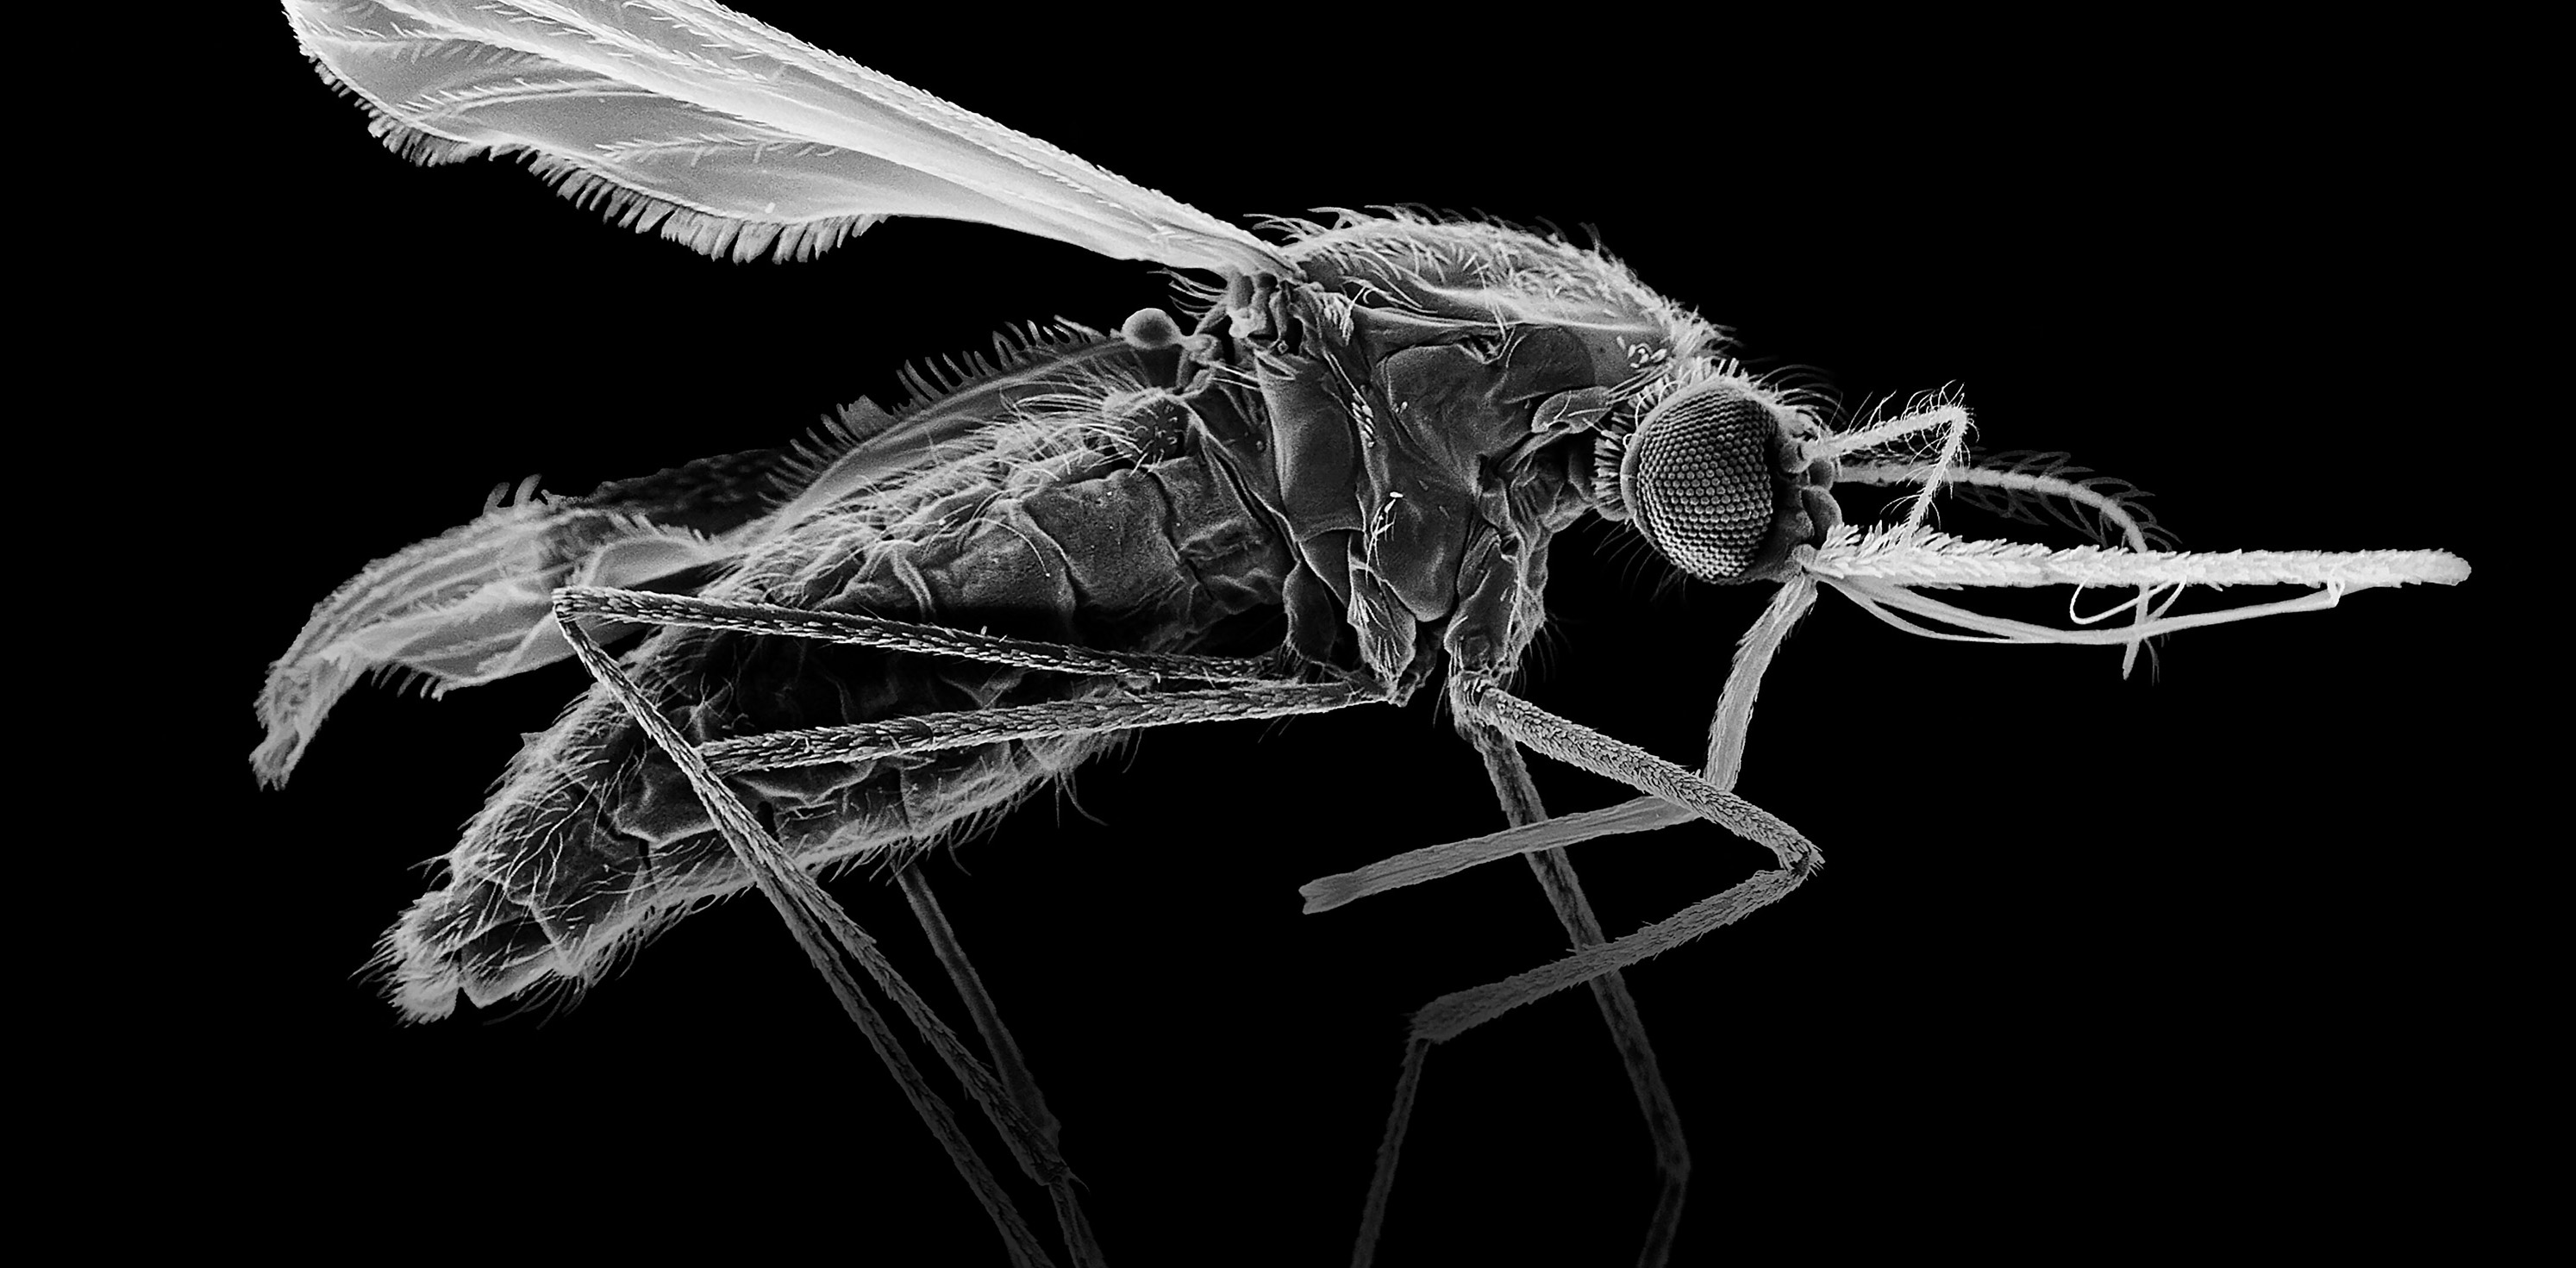 The mosquito Anopheles stephensi spreads malaria in India and other parts of Asia.